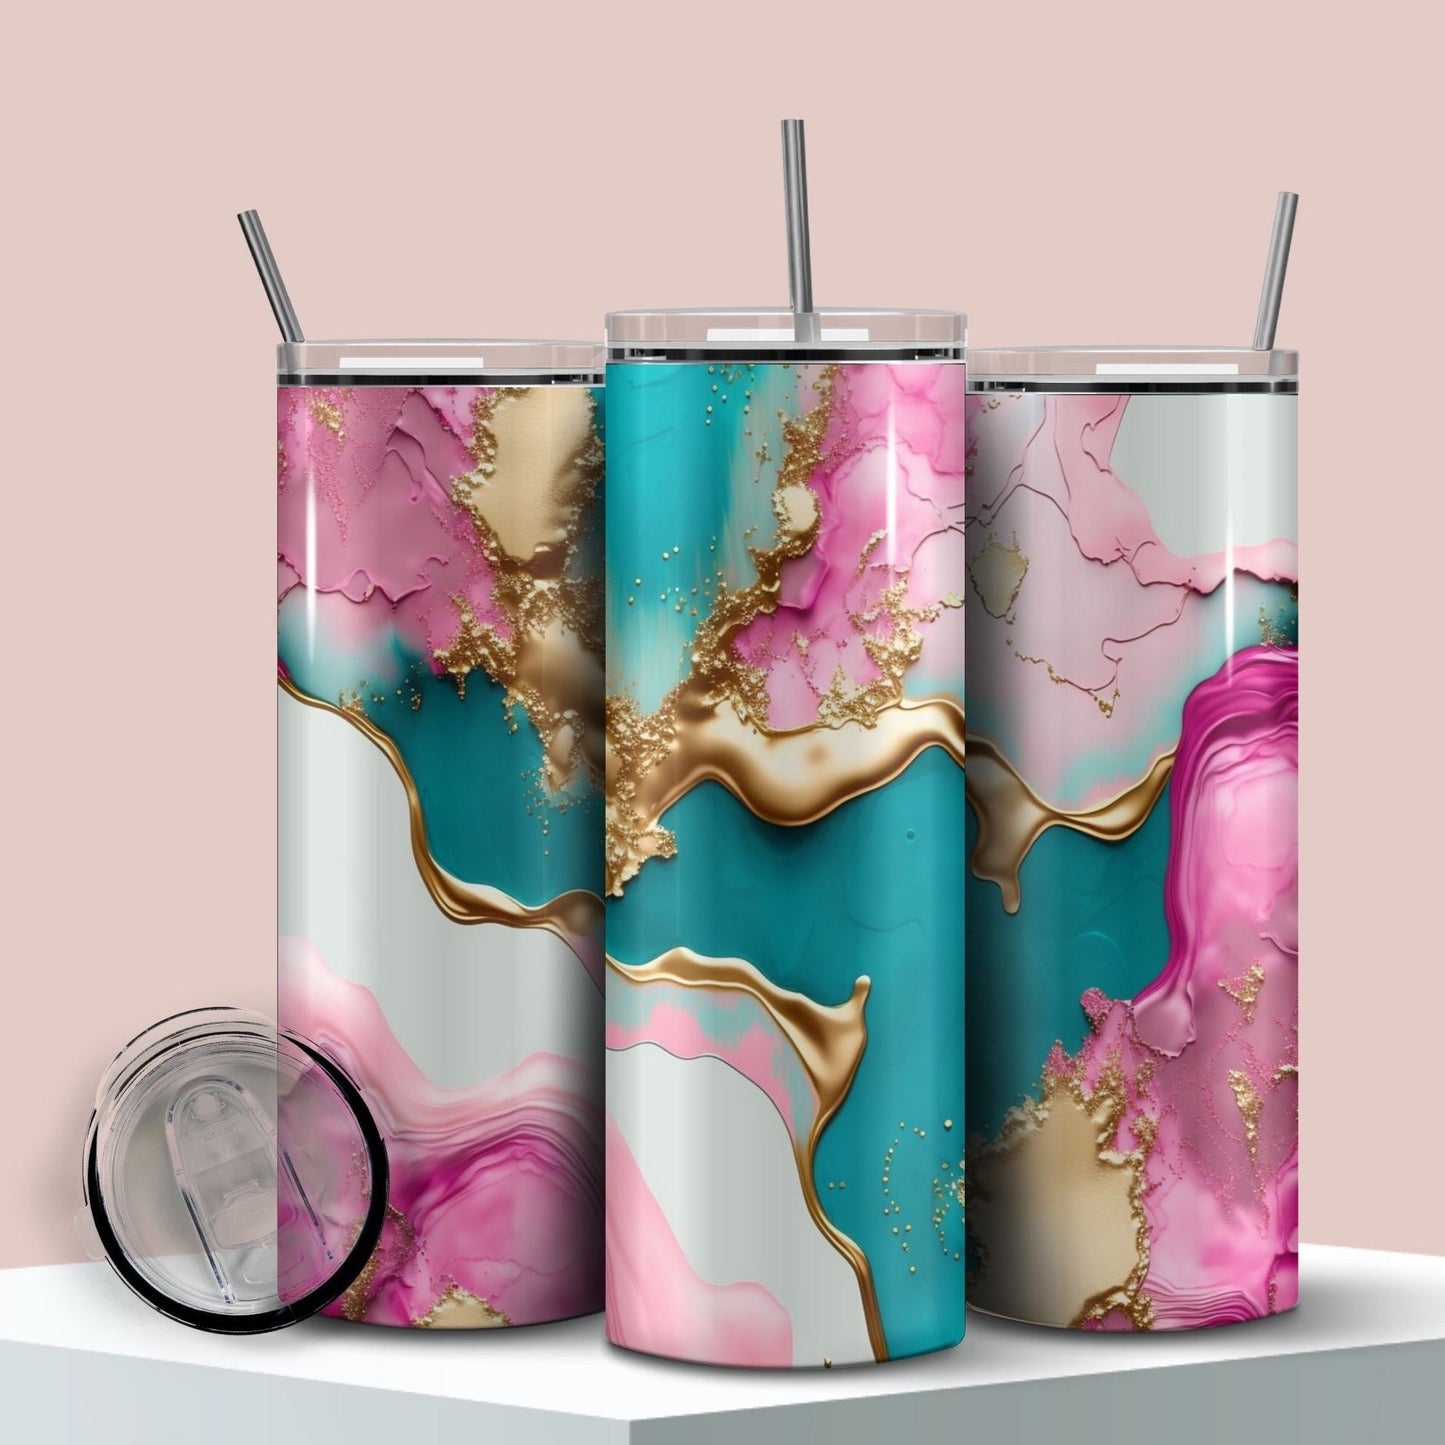 3D Pink Teal and Gold Skinny Tumbler Cup for Iced Coffee or Hot coffee